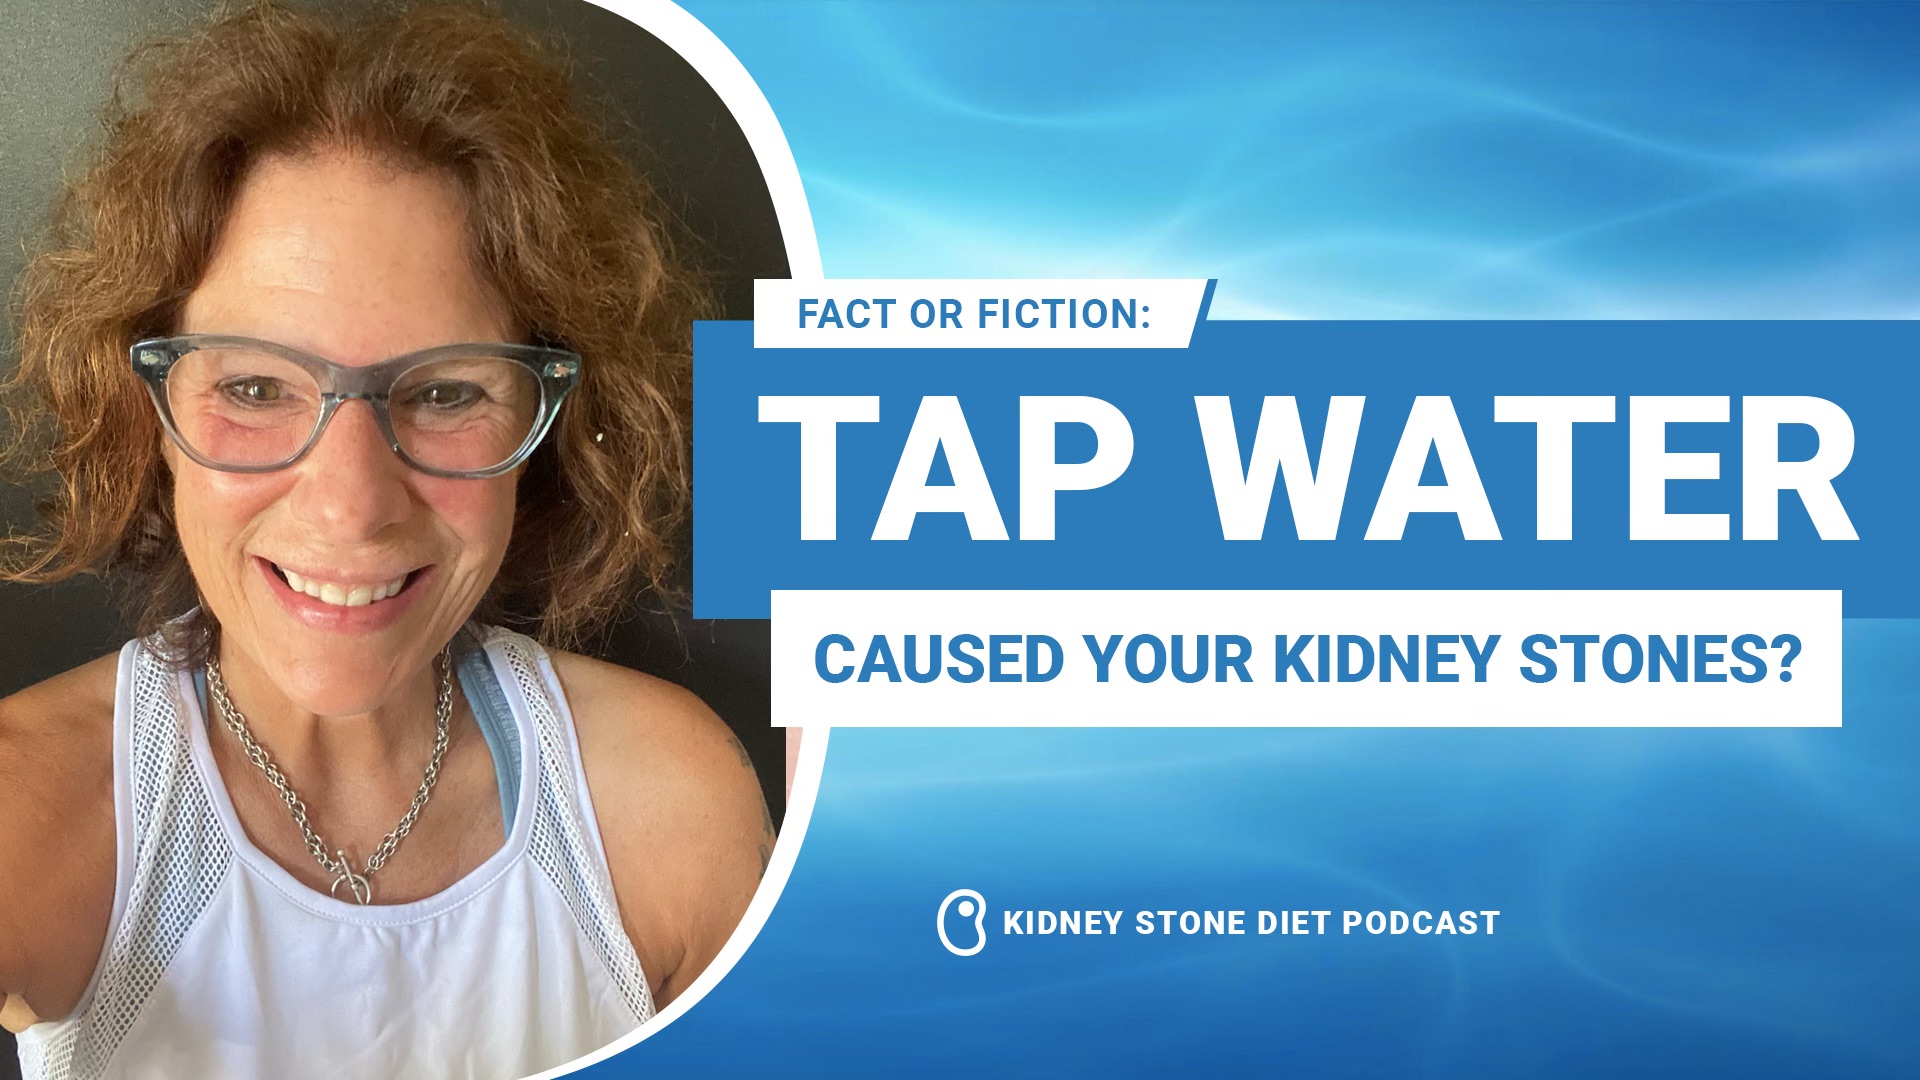 Fact or Fiction: Tap water caused your kidney stone